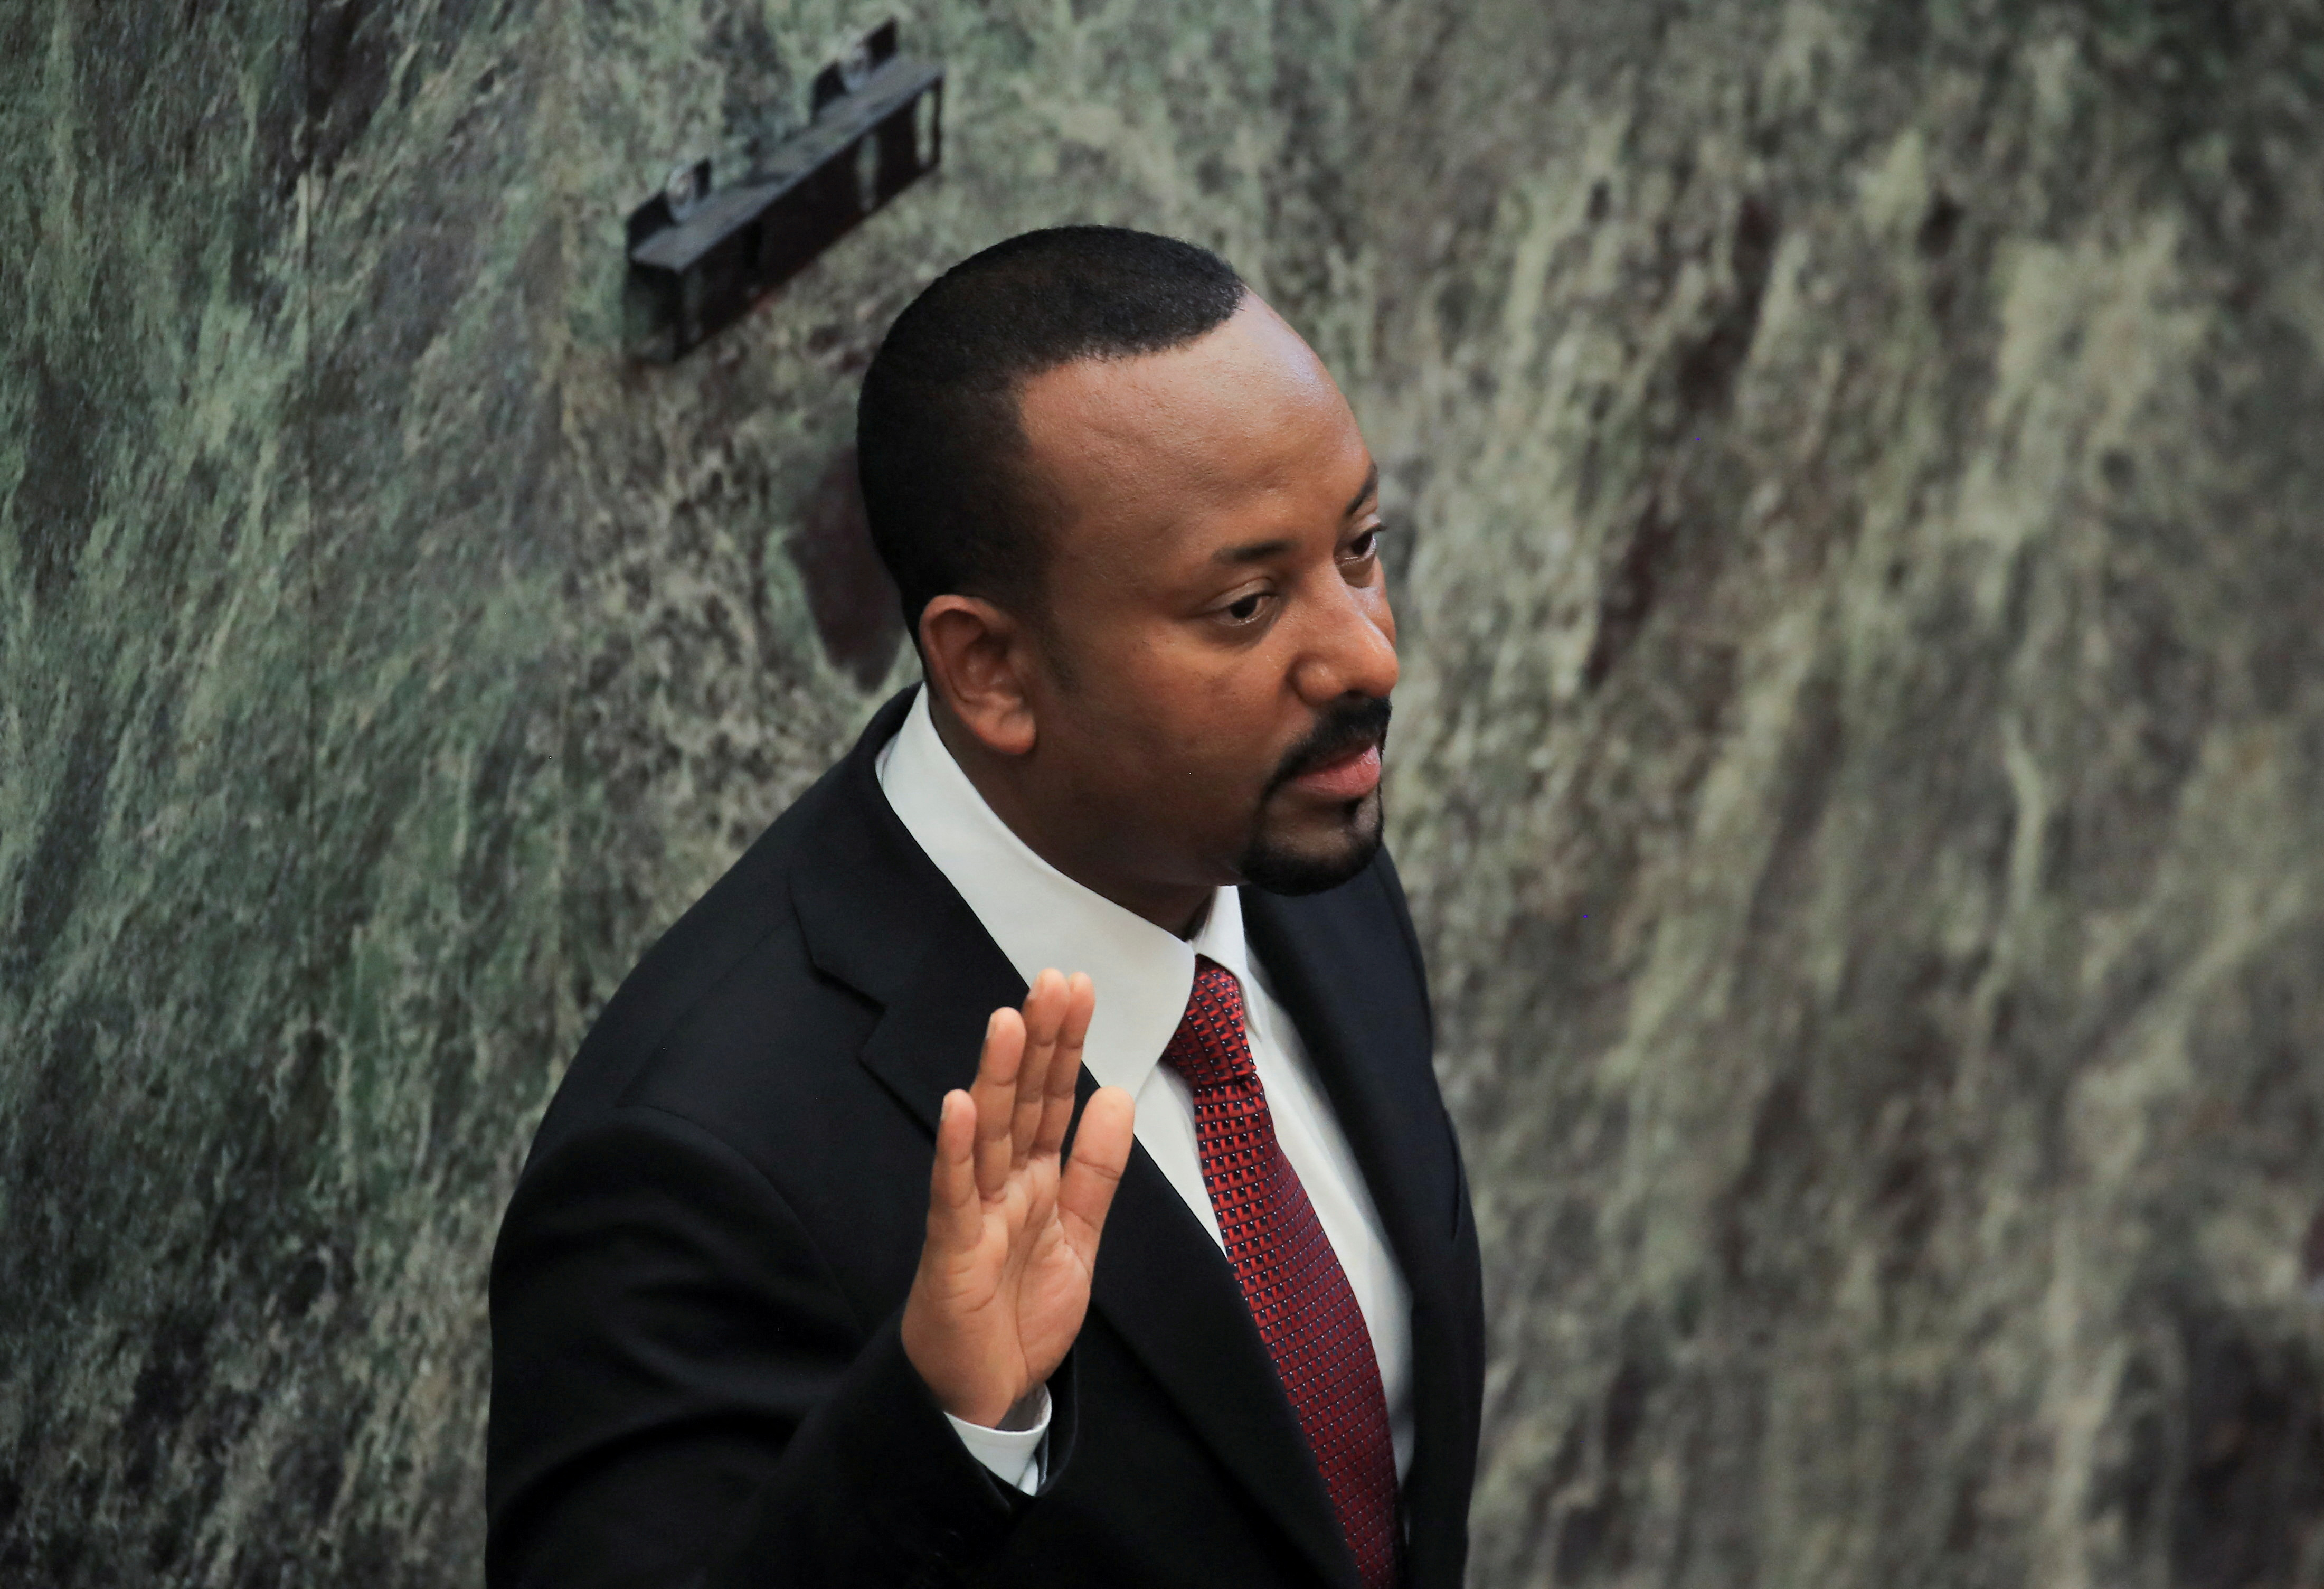 Ethiopia's Prime Minister Abiy Ahmed takes oath during his incumbent ceremony at the Parliament building in Addis Ababa